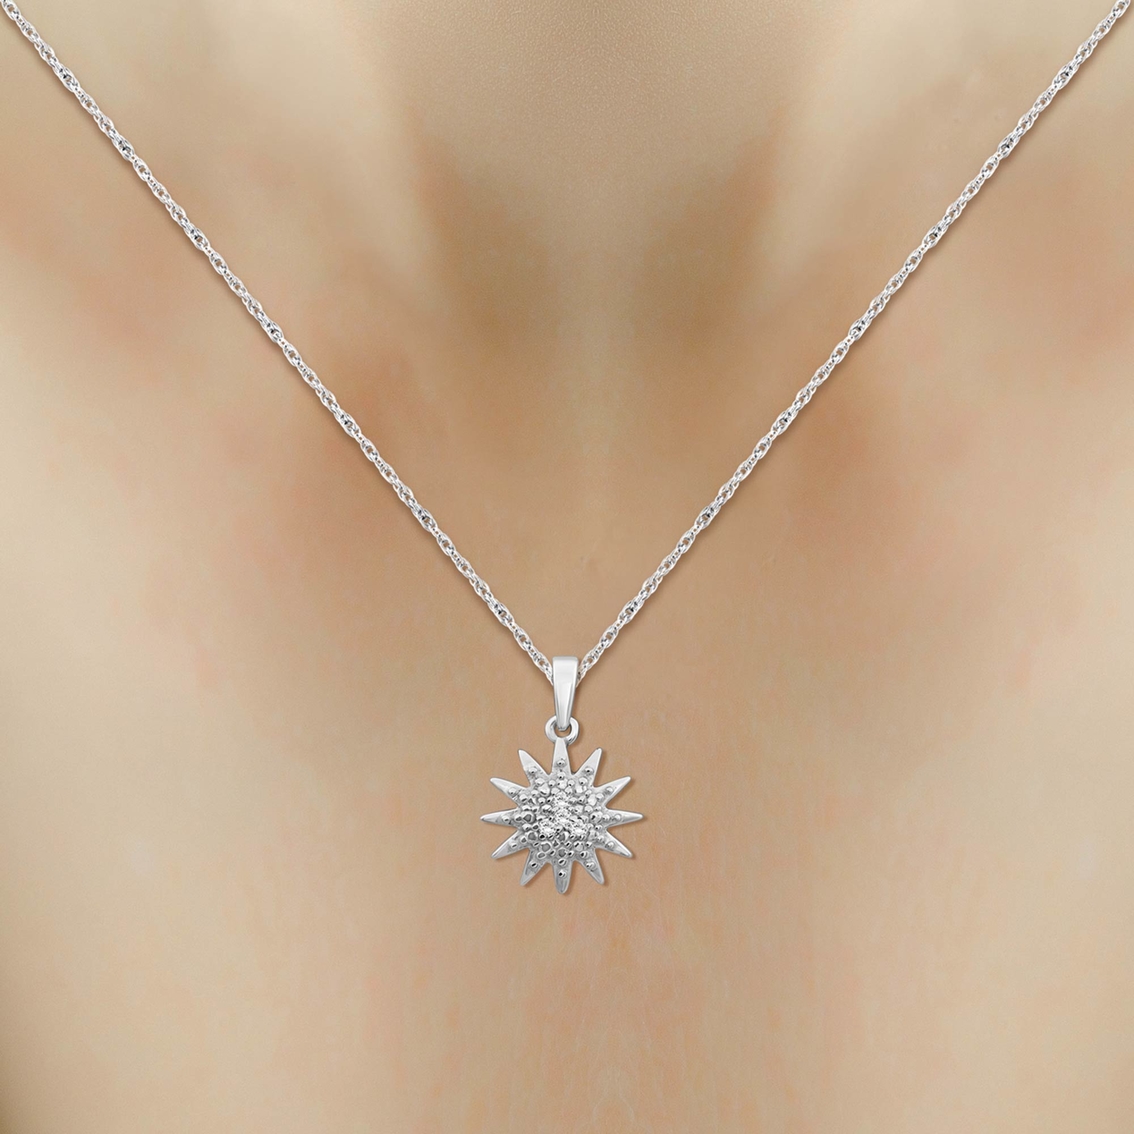 She Shines Sterling Silver Star Pendant Set - Image 4 of 5